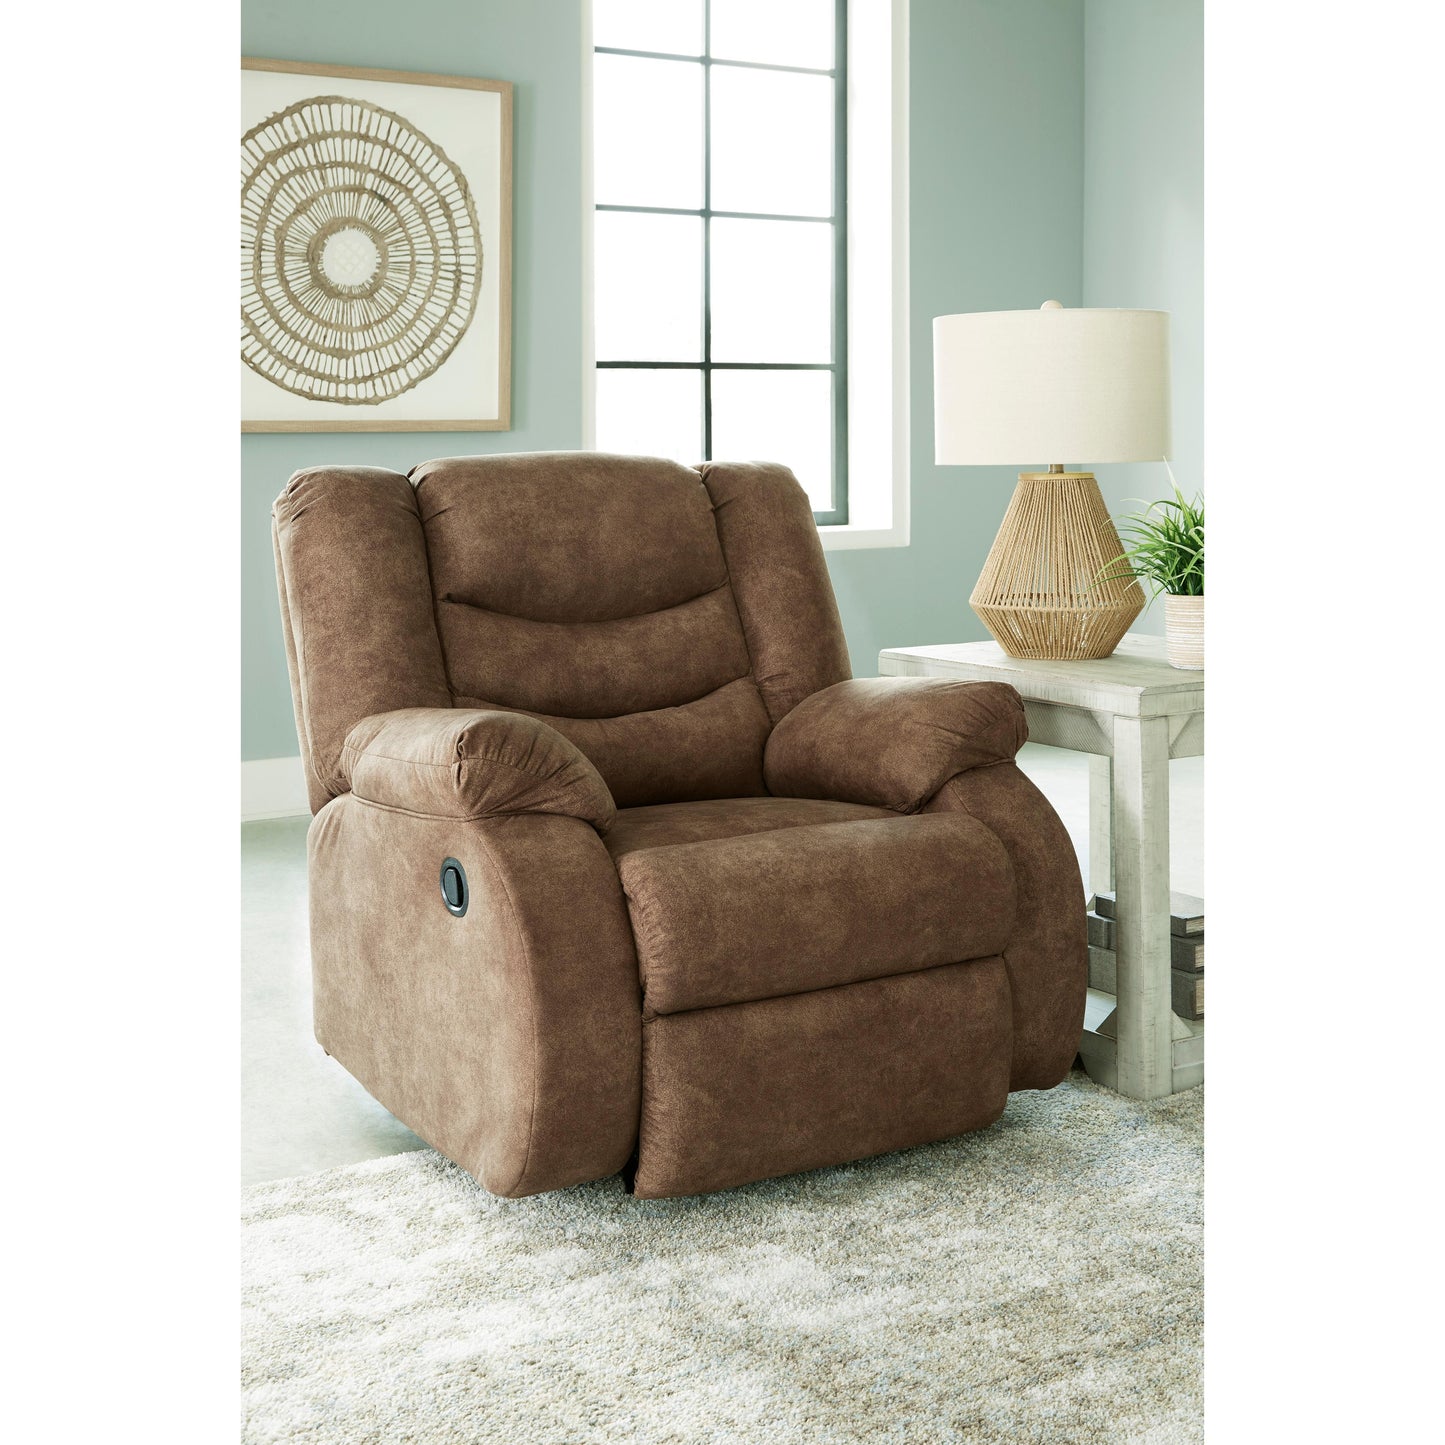 Signature Design by Ashley Partymate Rocker Leather Look Recliner 3690225 IMAGE 6